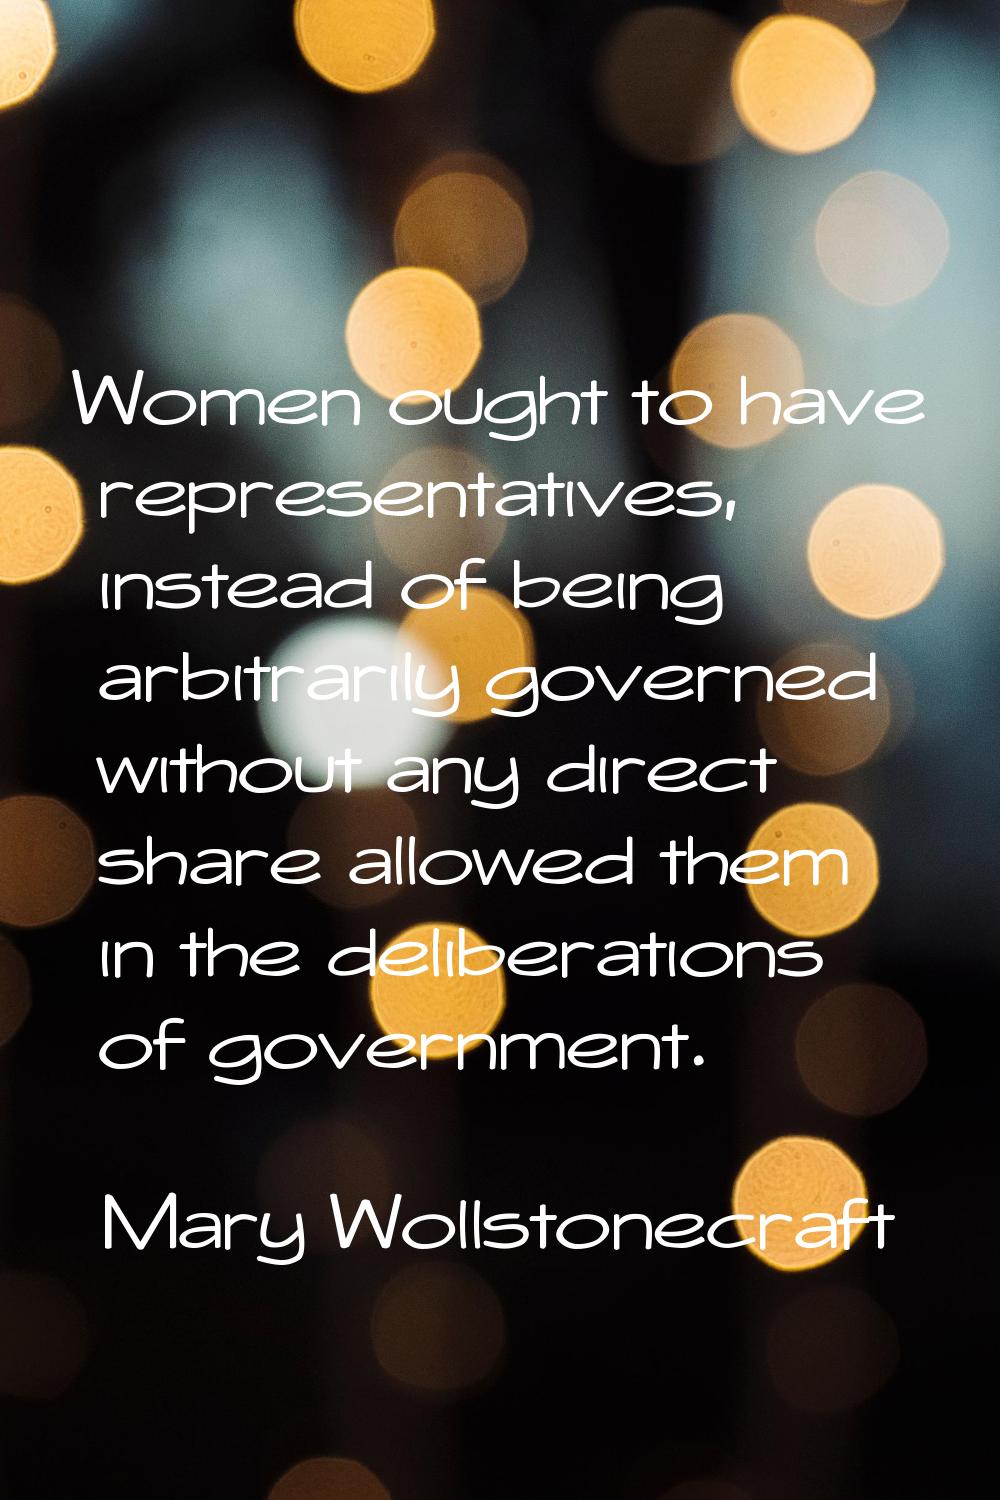 Women ought to have representatives, instead of being arbitrarily governed without any direct share